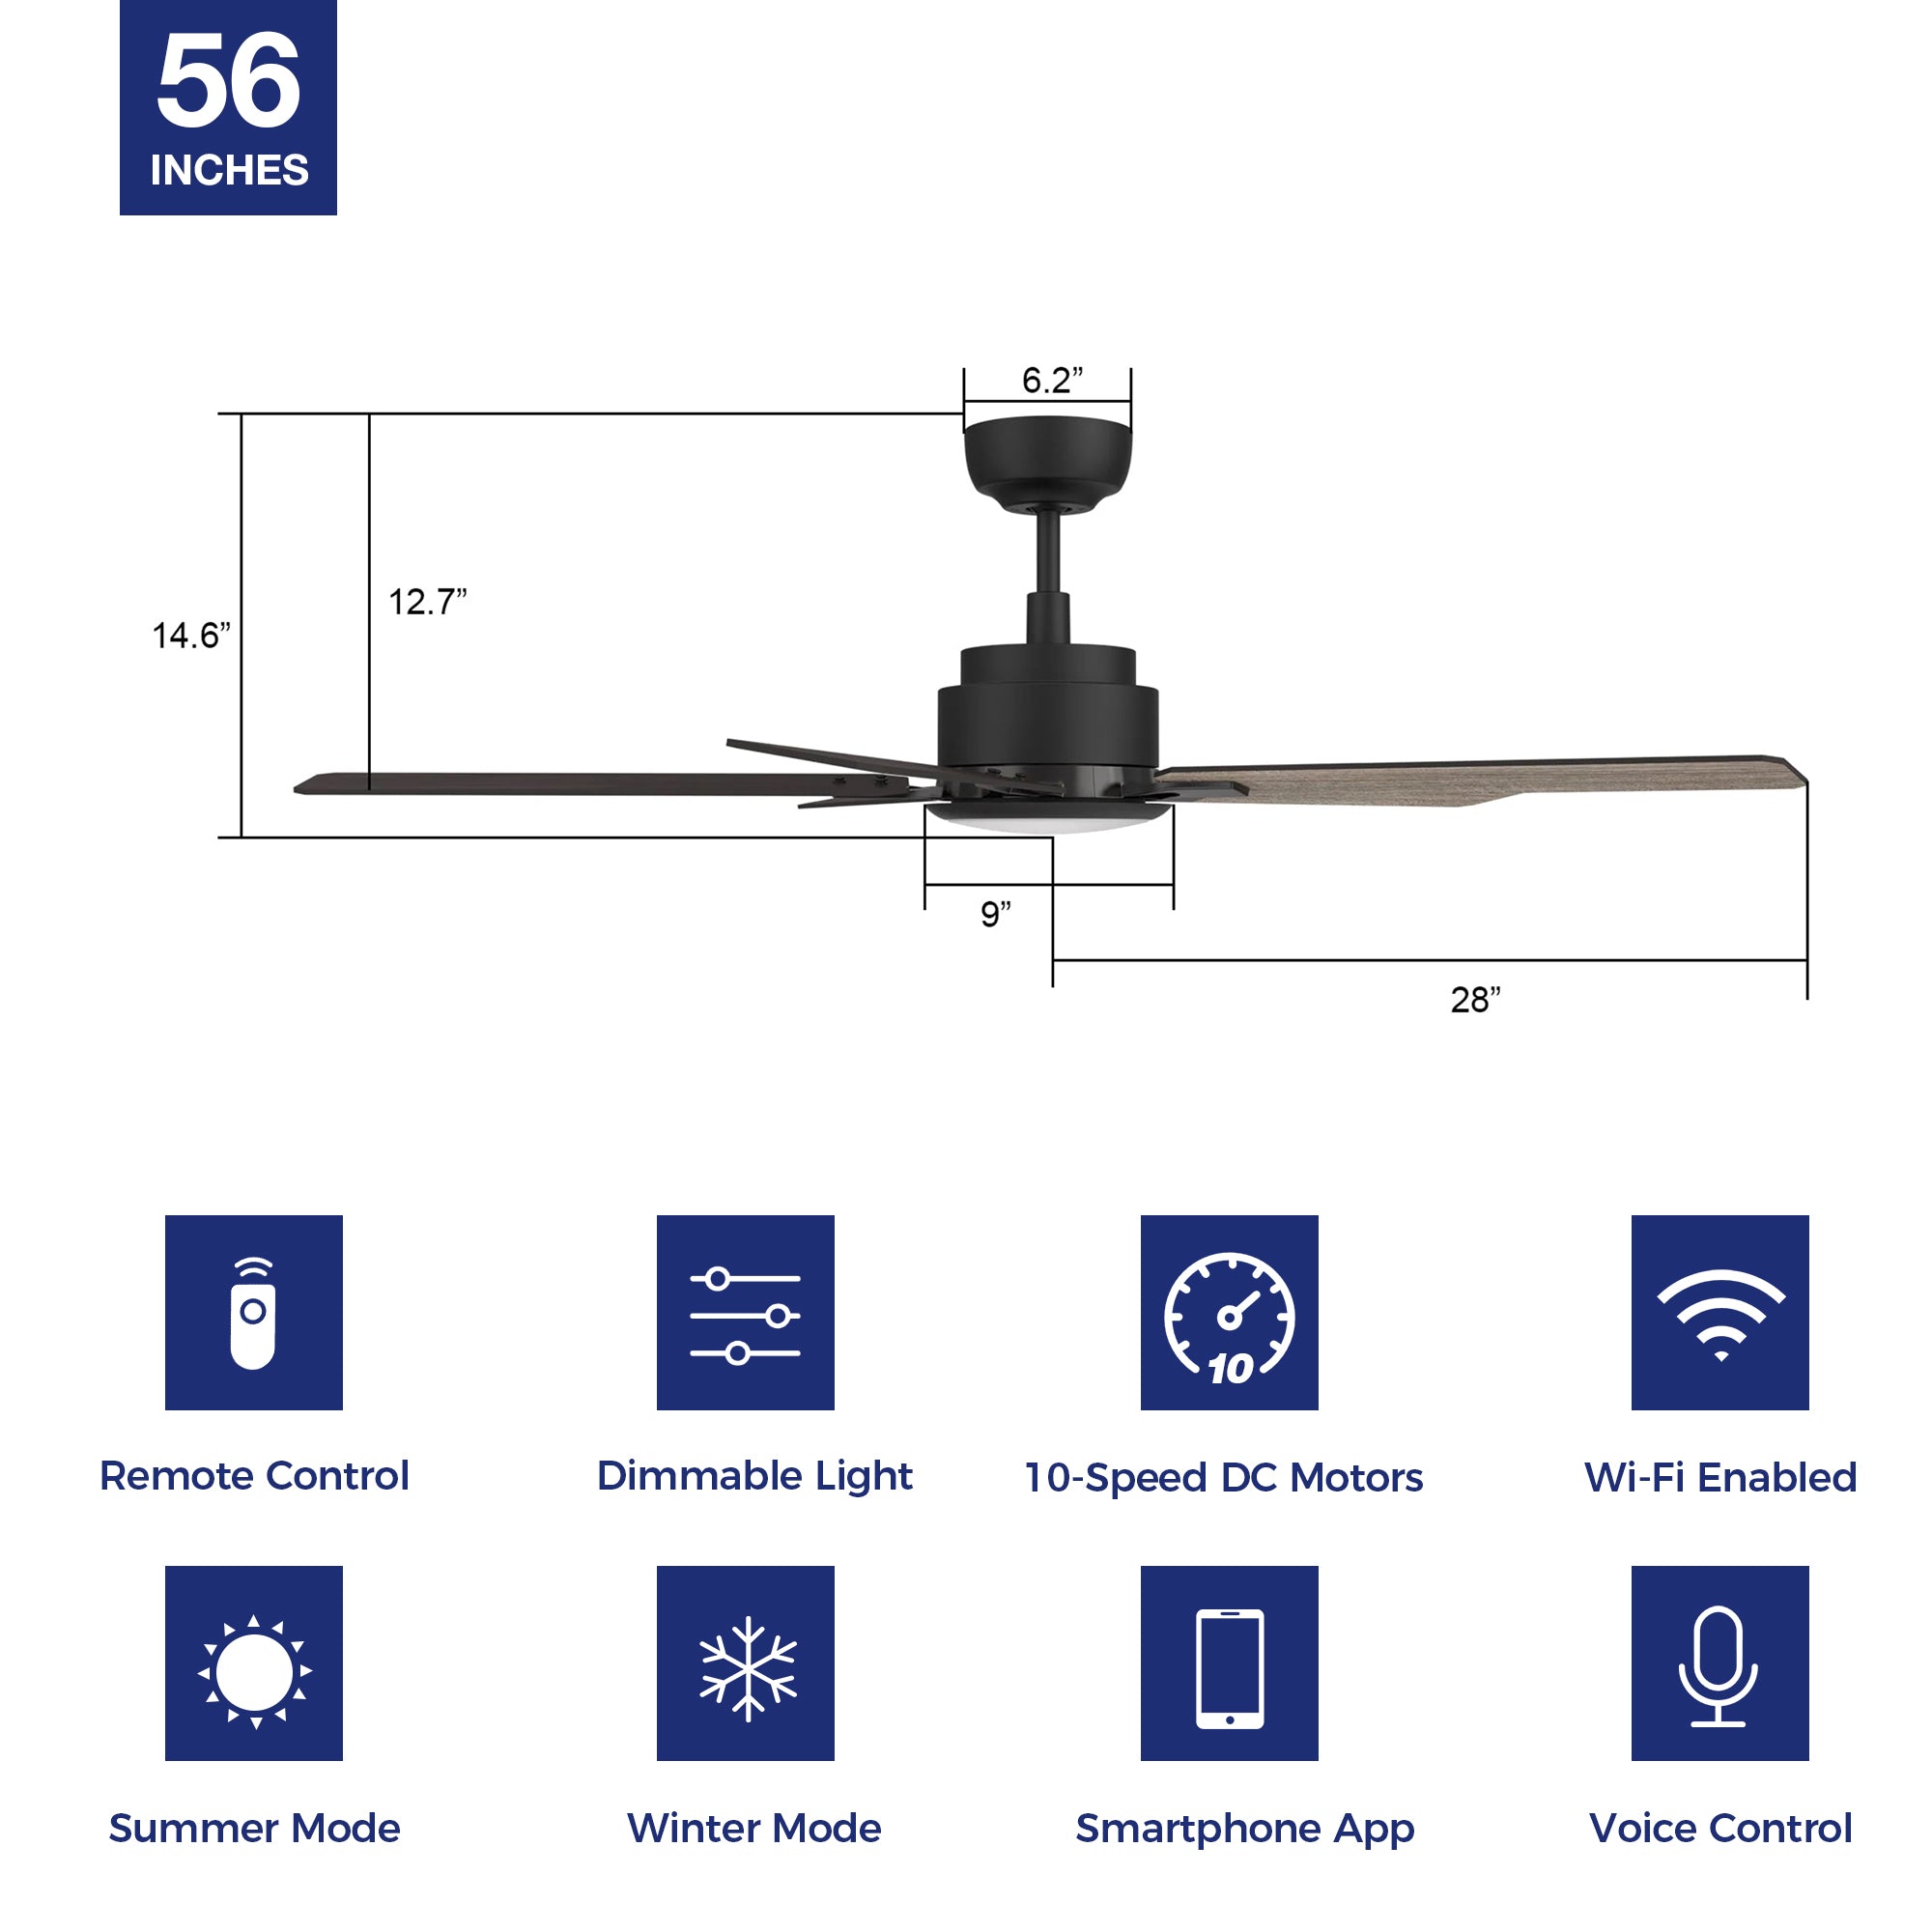 This Essex 56&#39;&#39; smart ceiling fan keeps your space cool, bright, and stylish. It is a soft modern masterpiece perfect for your large indoor living spaces. This Wifi smart ceiling fan is a simplicity designing with Black finish, use elegant Plywood blades and has an integrated 4000K LED cool light. The fan features Remote control, Wi-Fi apps, Siri Shortcut and Voice control technology (compatible with Amazon Alexa and Google Home Assistant ) to set fan preferences.